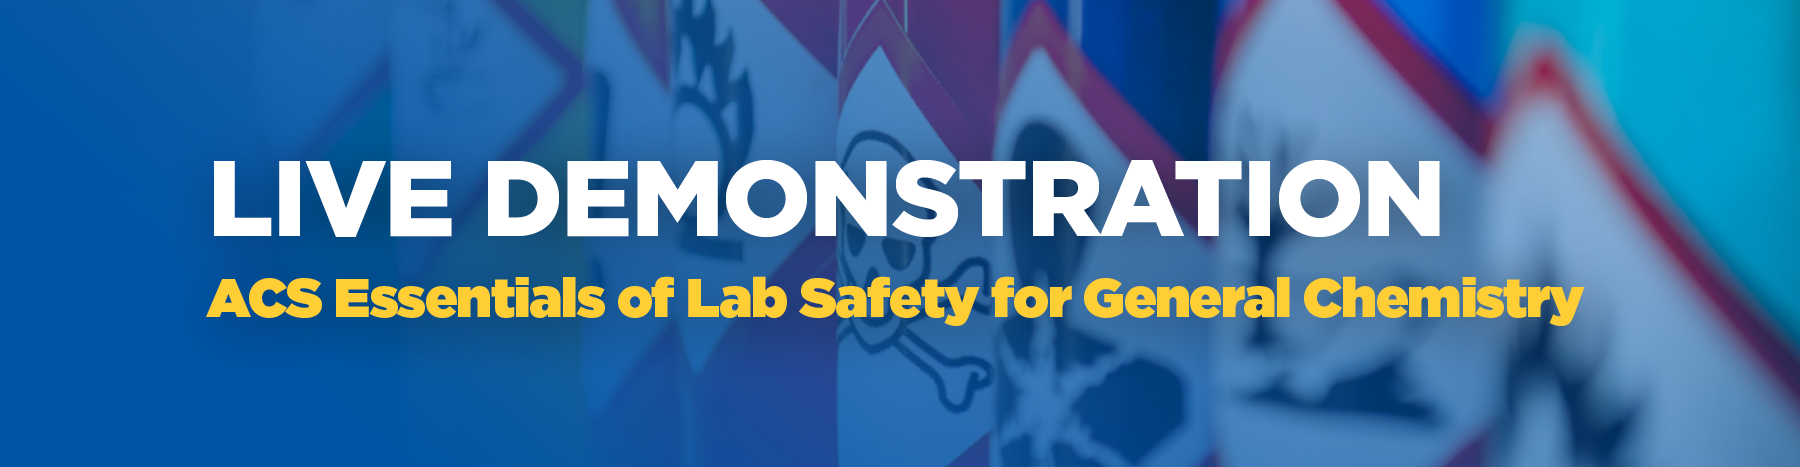 Live Demo: ACS Essentials of Lab Safety for General Chemistry